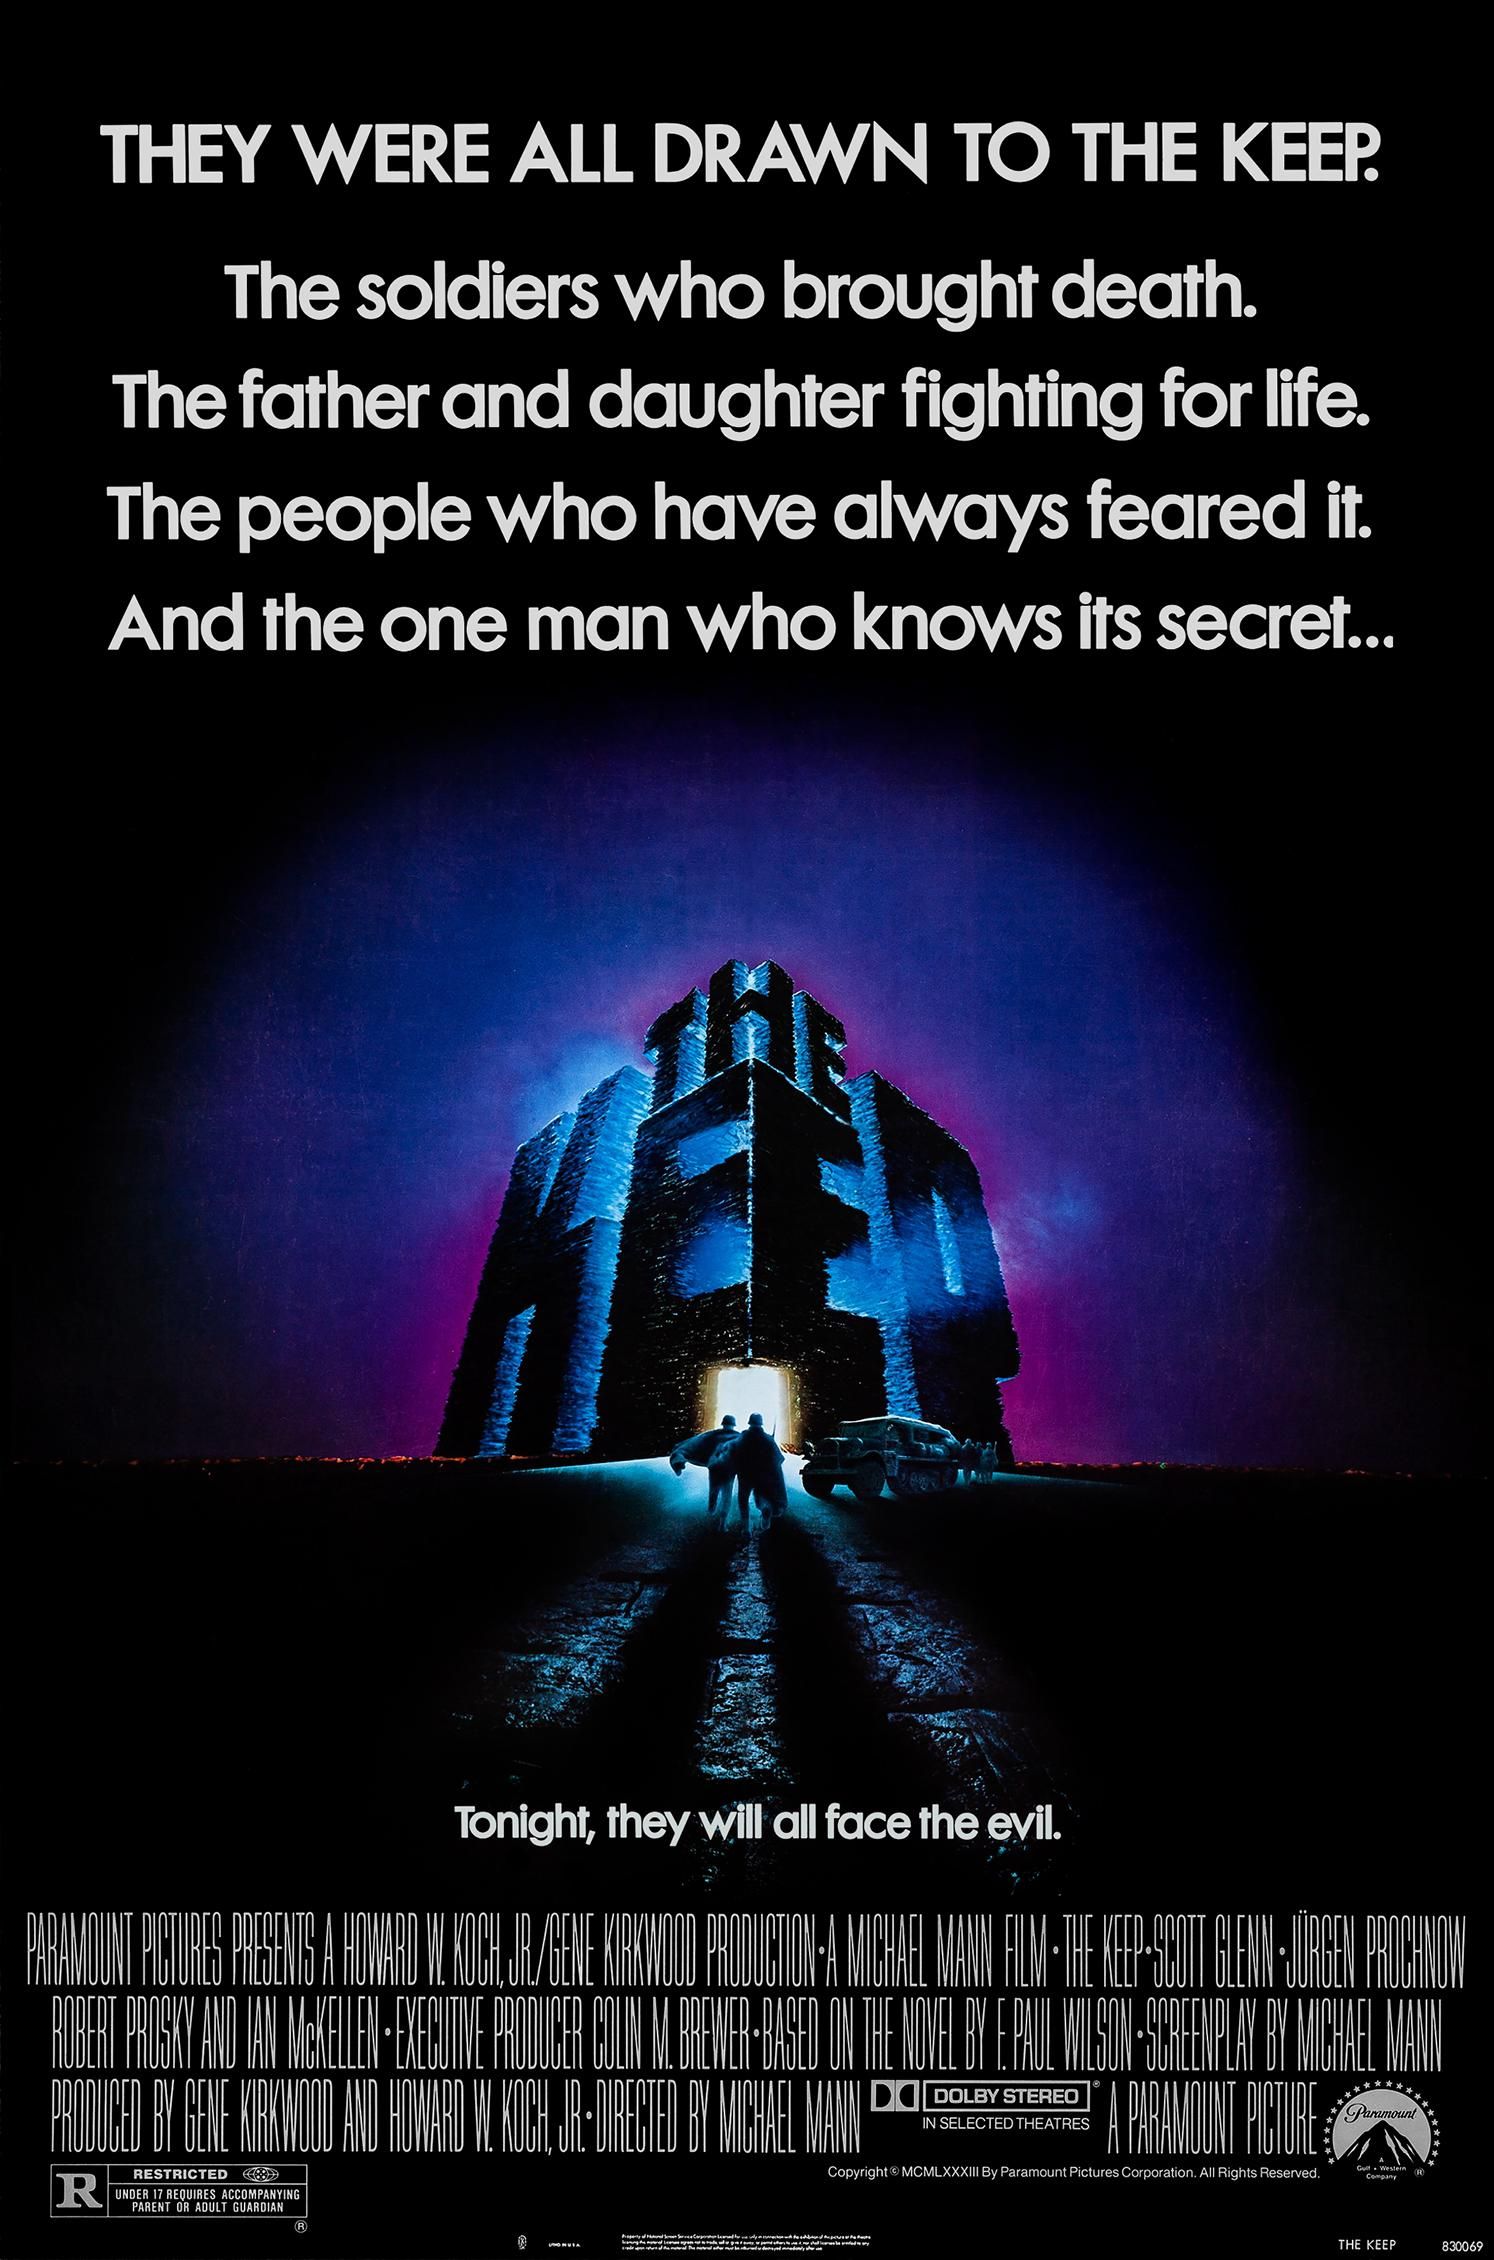 The Keep Film Poster